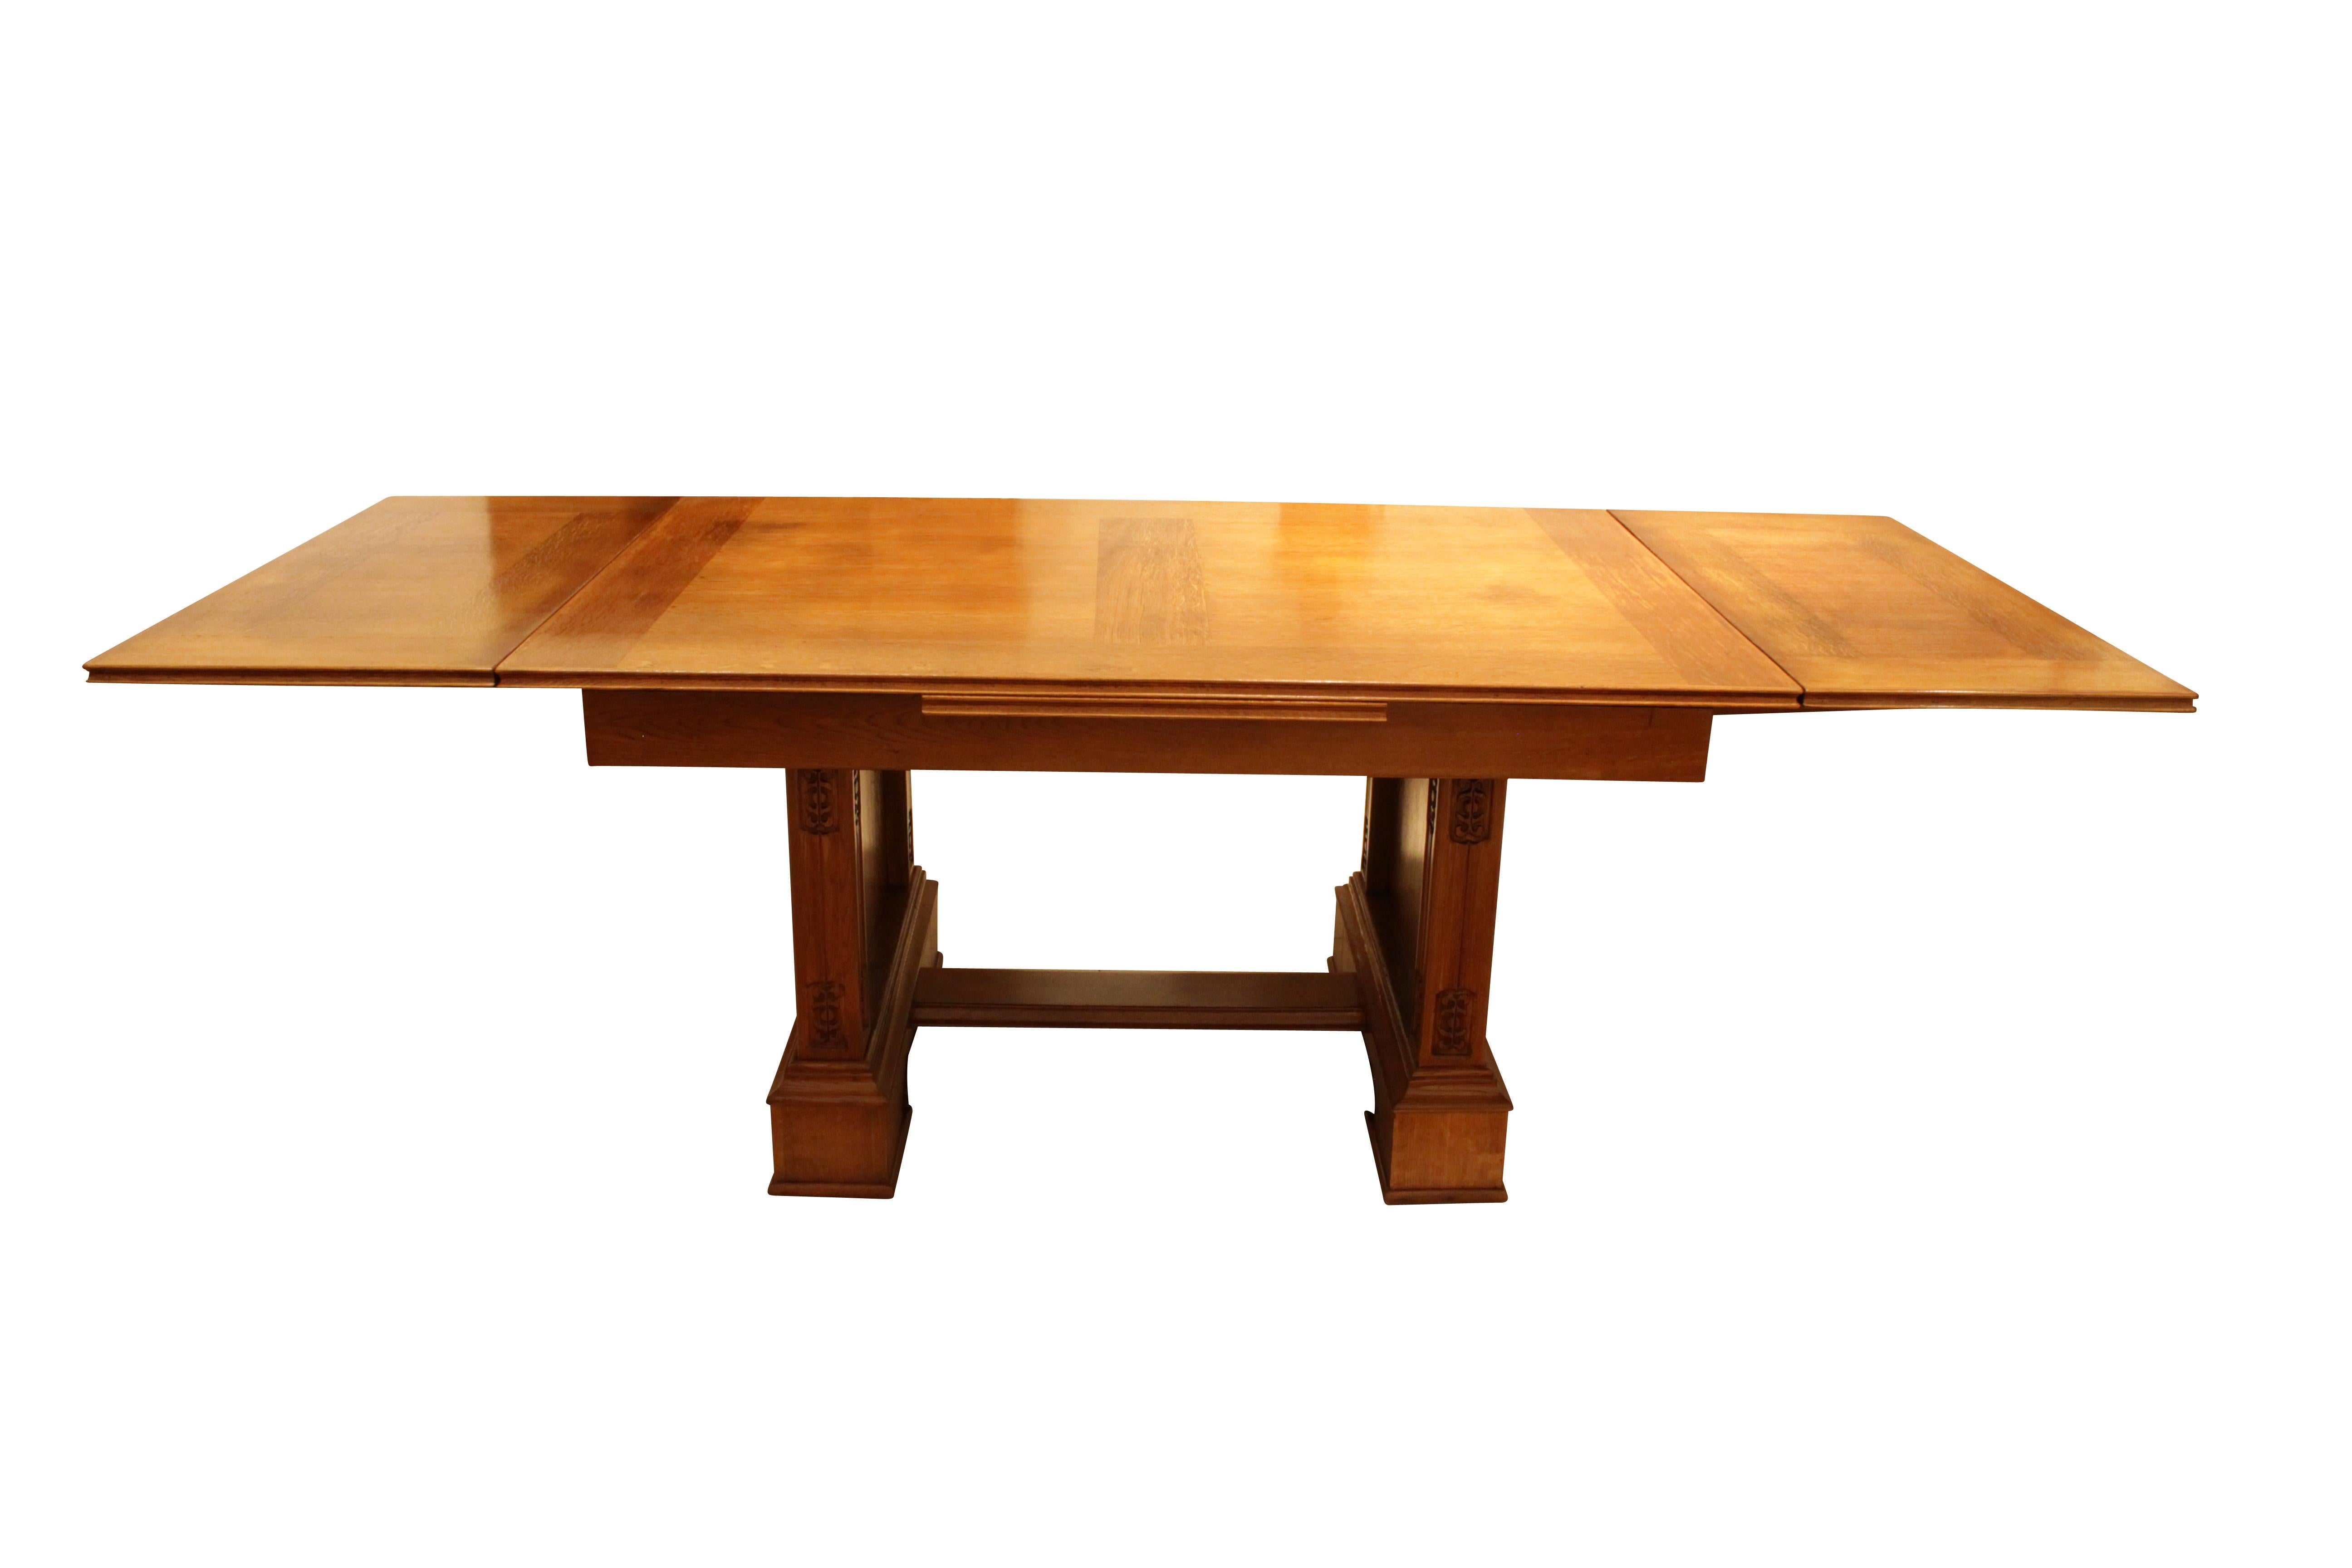 Beautiful big table made of oak from the Art Nouveau period. The table can be extended to a length of 2.48 m. In very good restored condition.